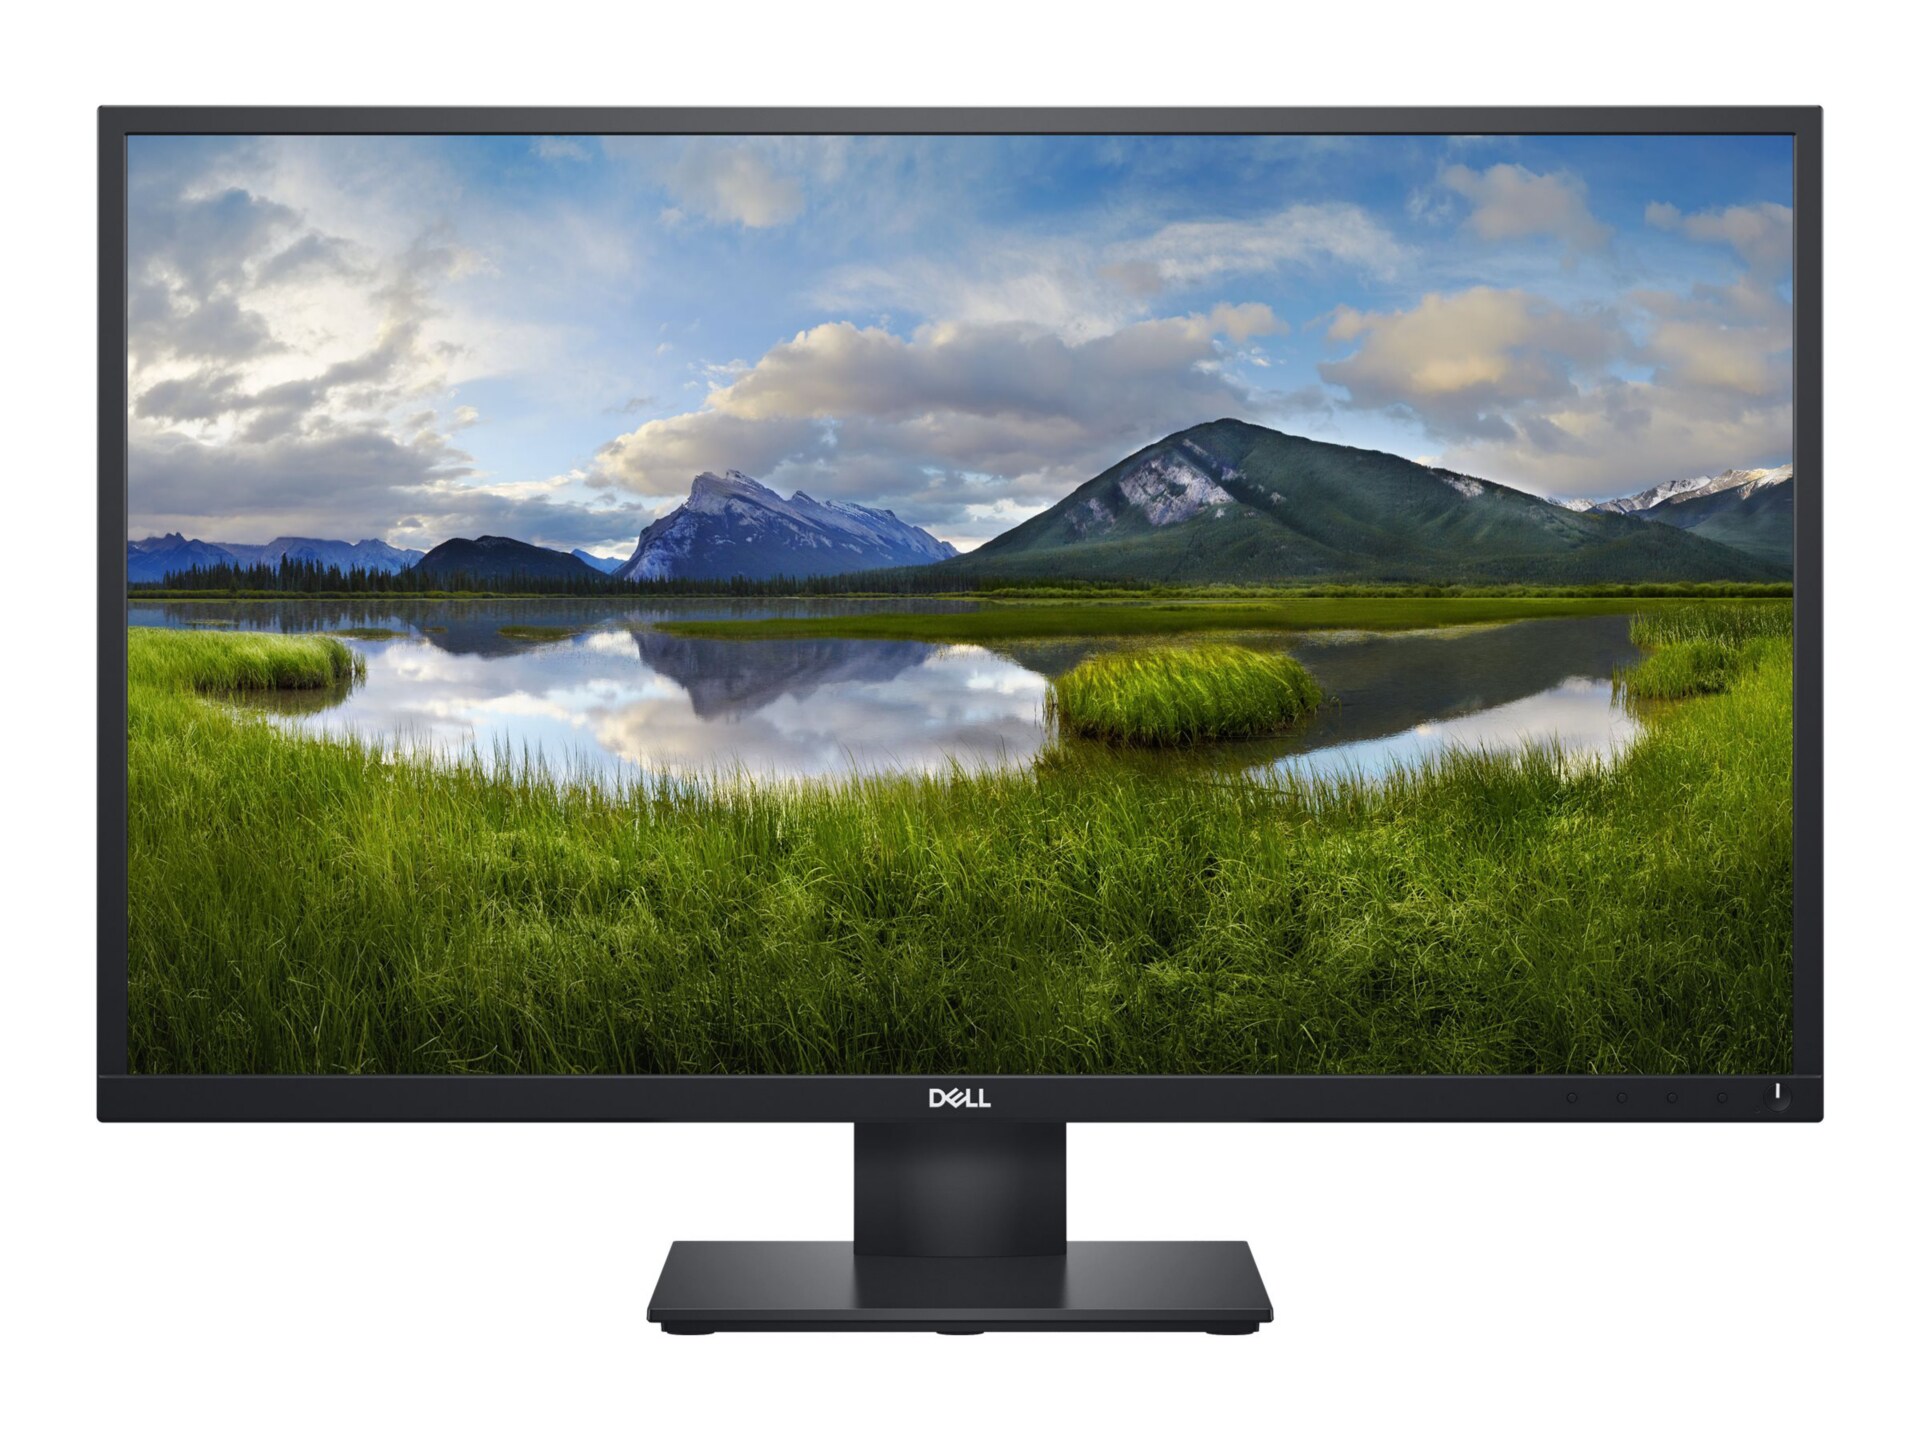 Dell E2720HS 27" 1920 x 1080 IPS LED-Backlit LCD Monitor